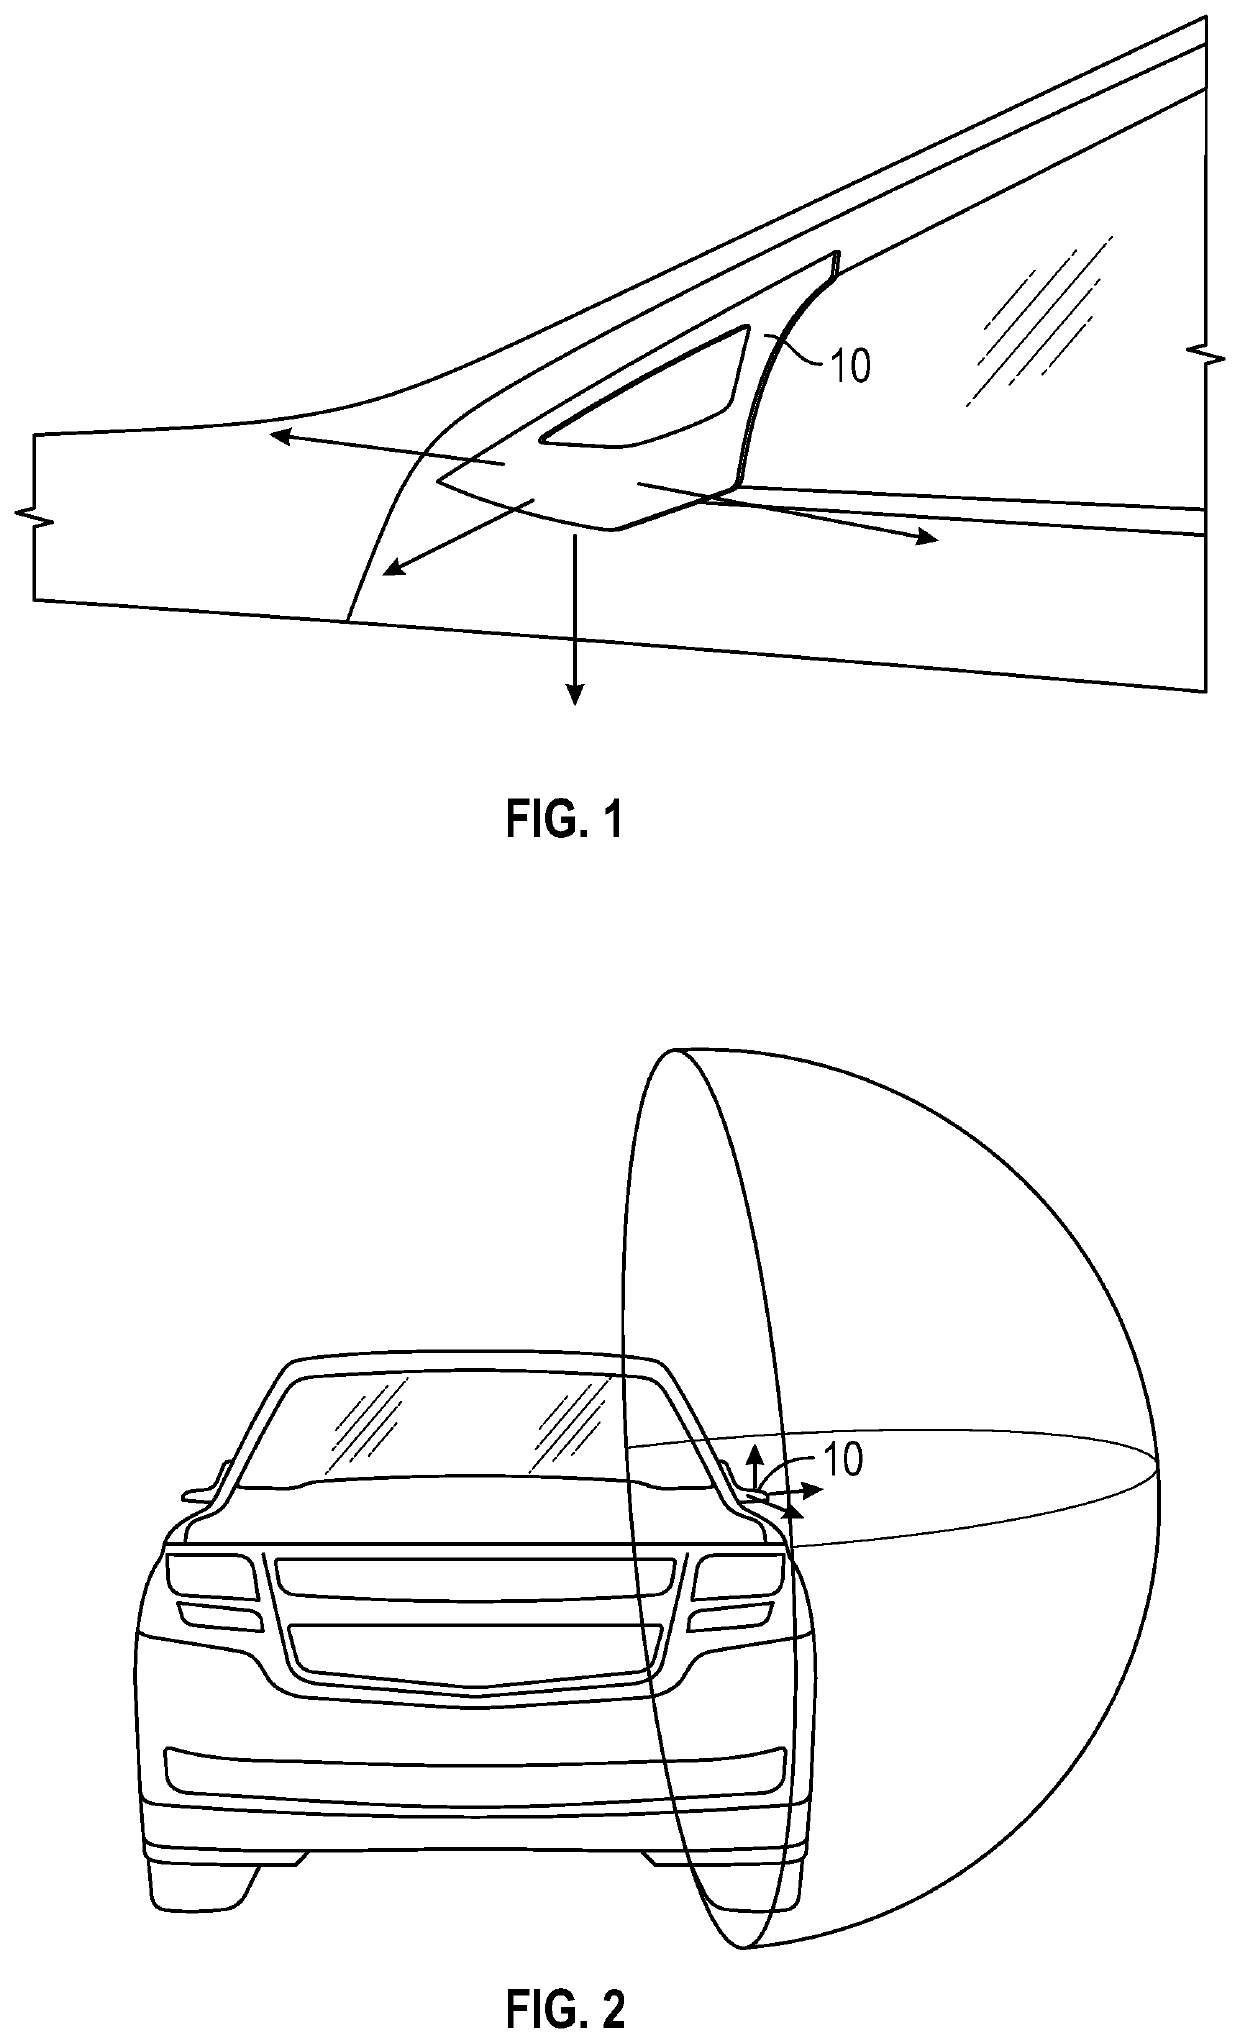 Deployable side shark fin with integrated side view camera and sensing device